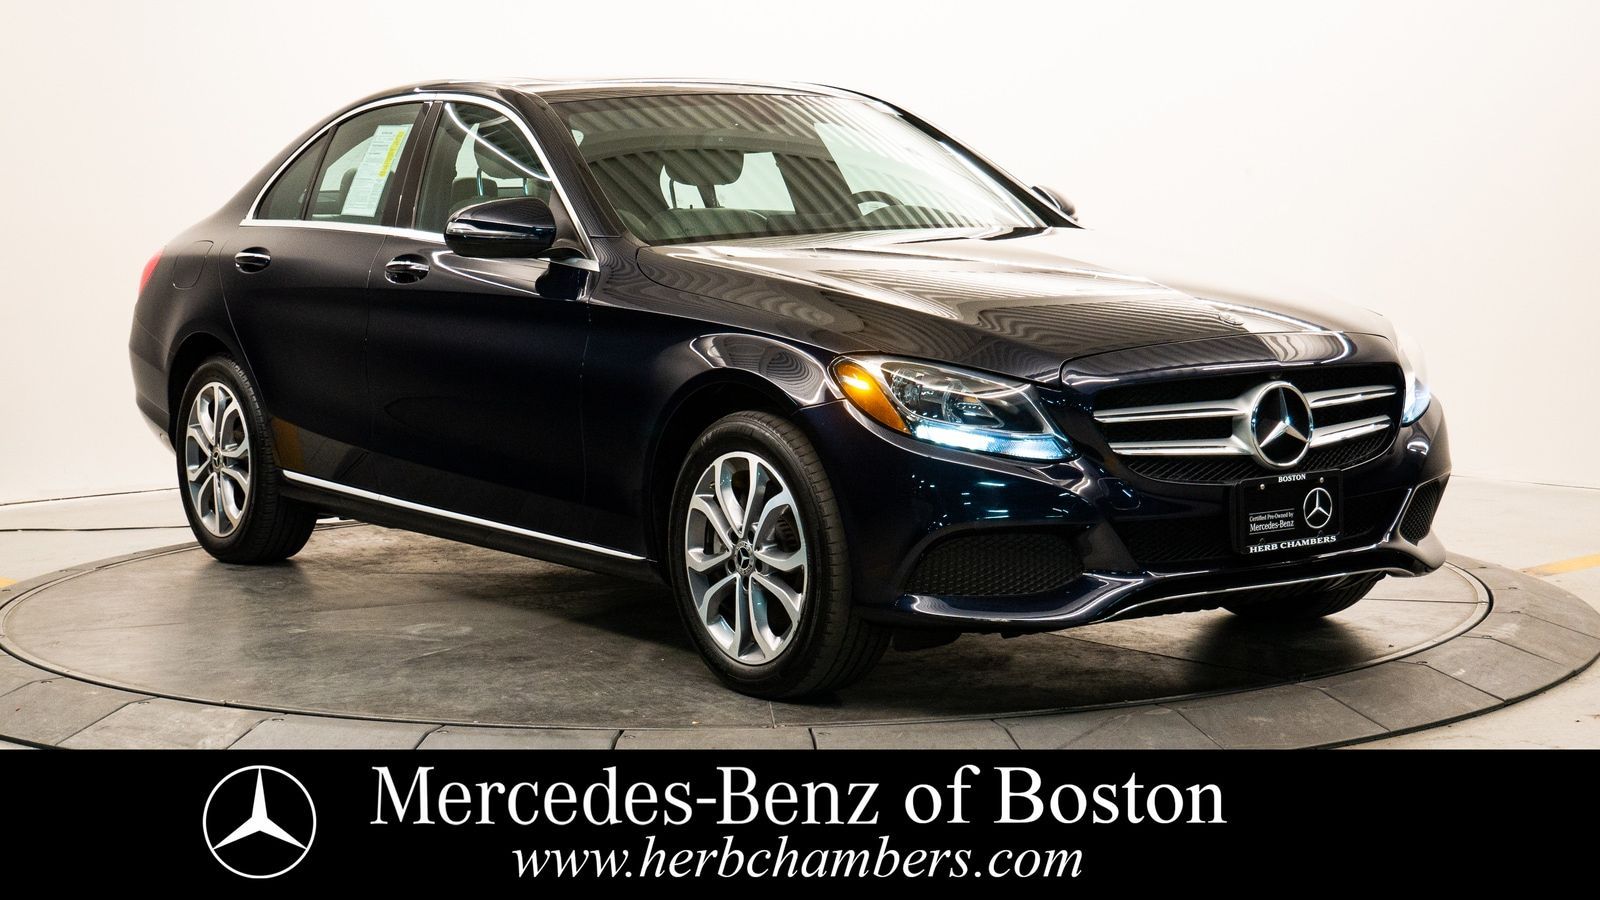 Used 2018 Mercedes-Benz C-Class